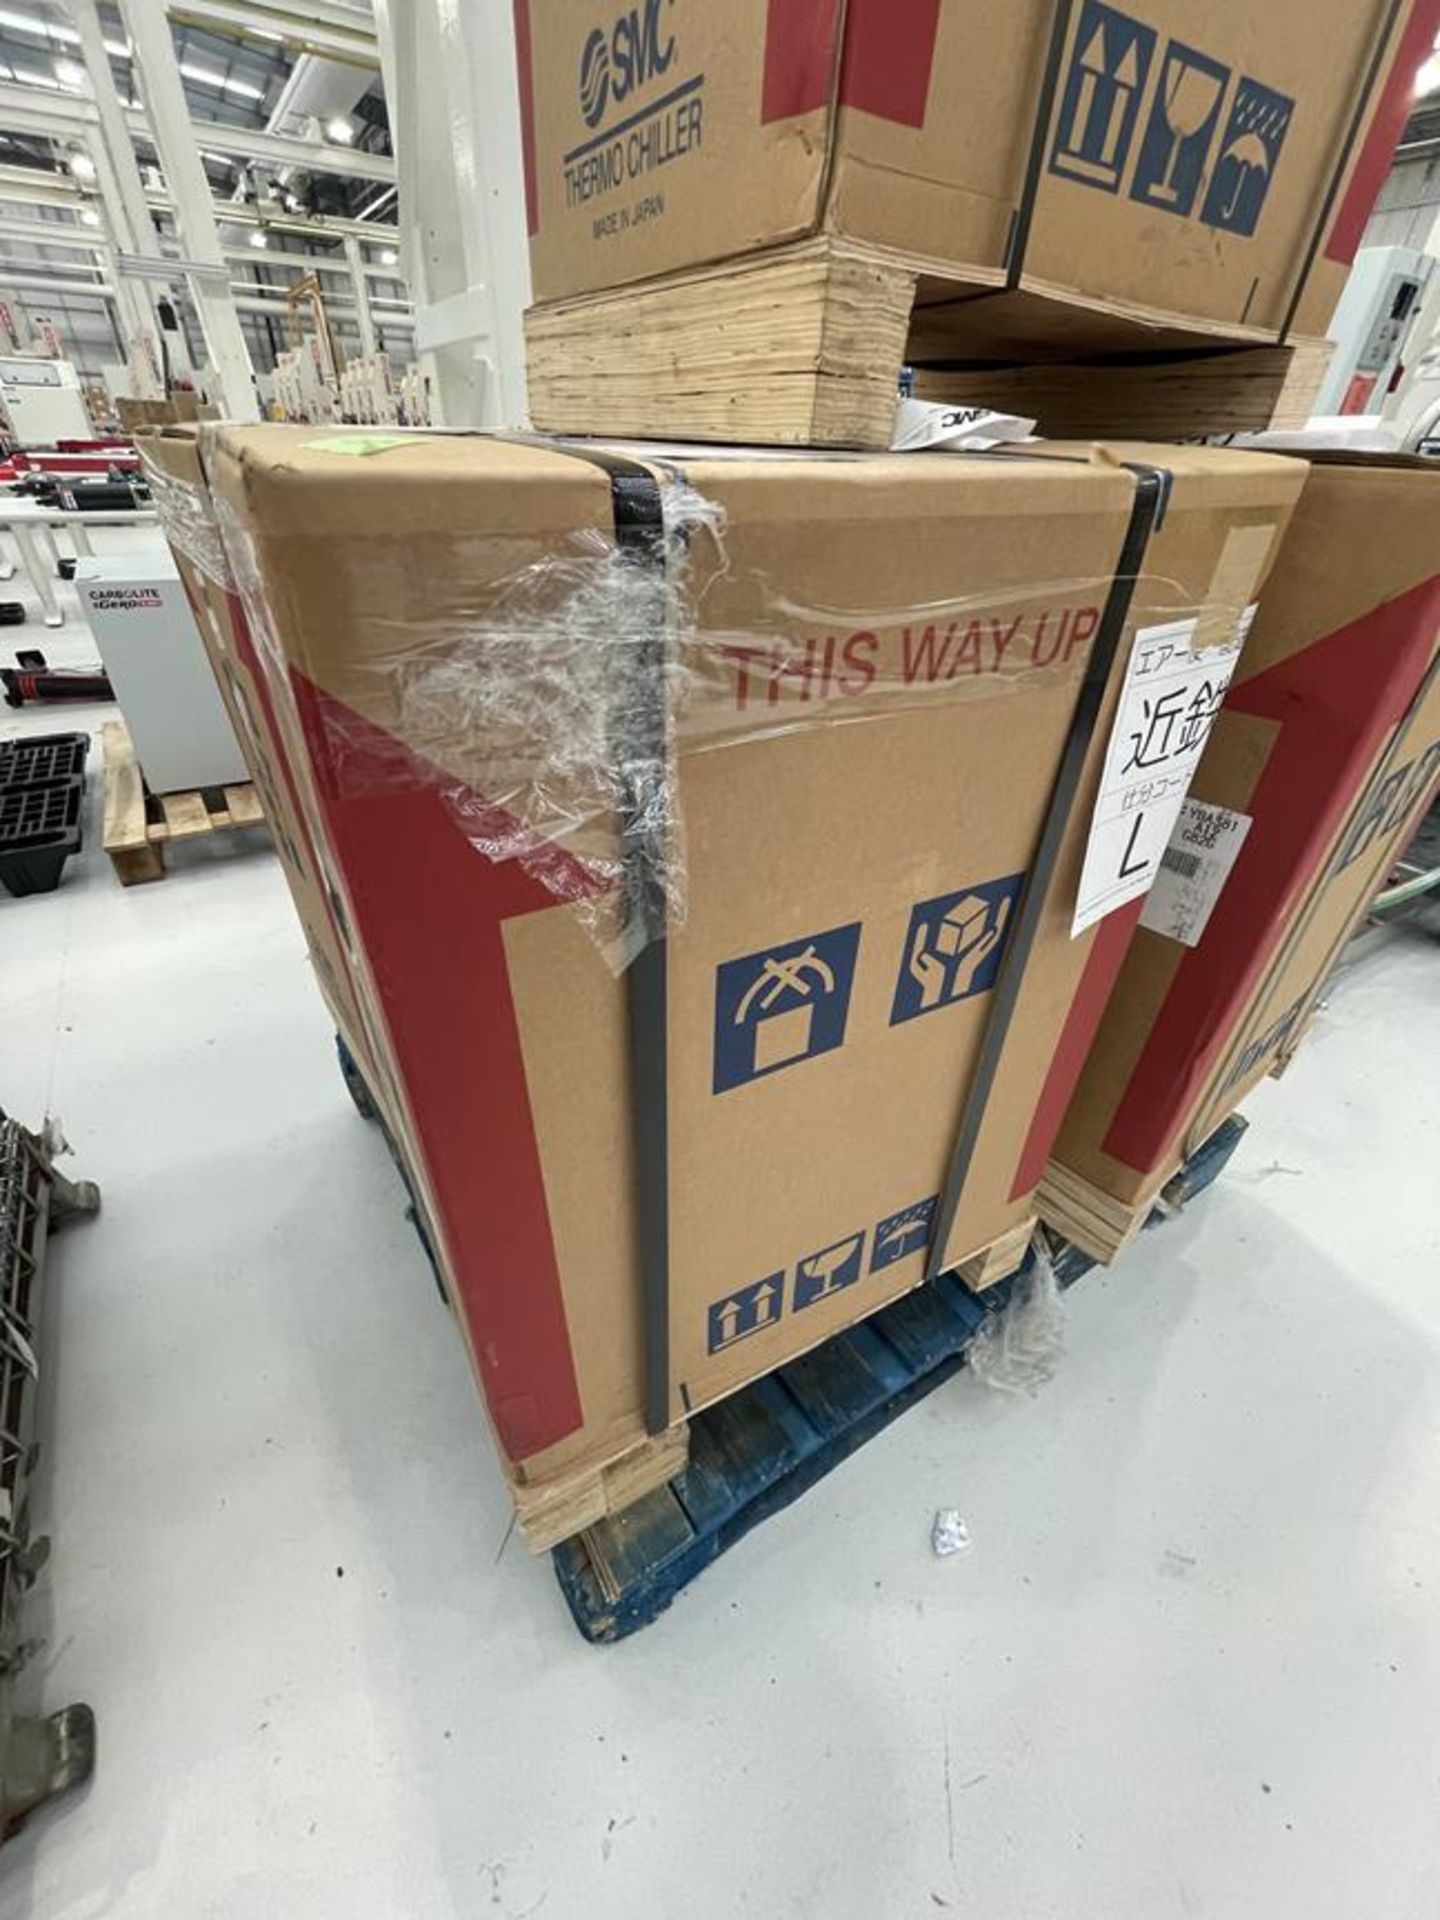 SMC, HRS024-AF-20 thermo chiller, Serial No. AO745 (DOM: 2021) (boxed and unused)